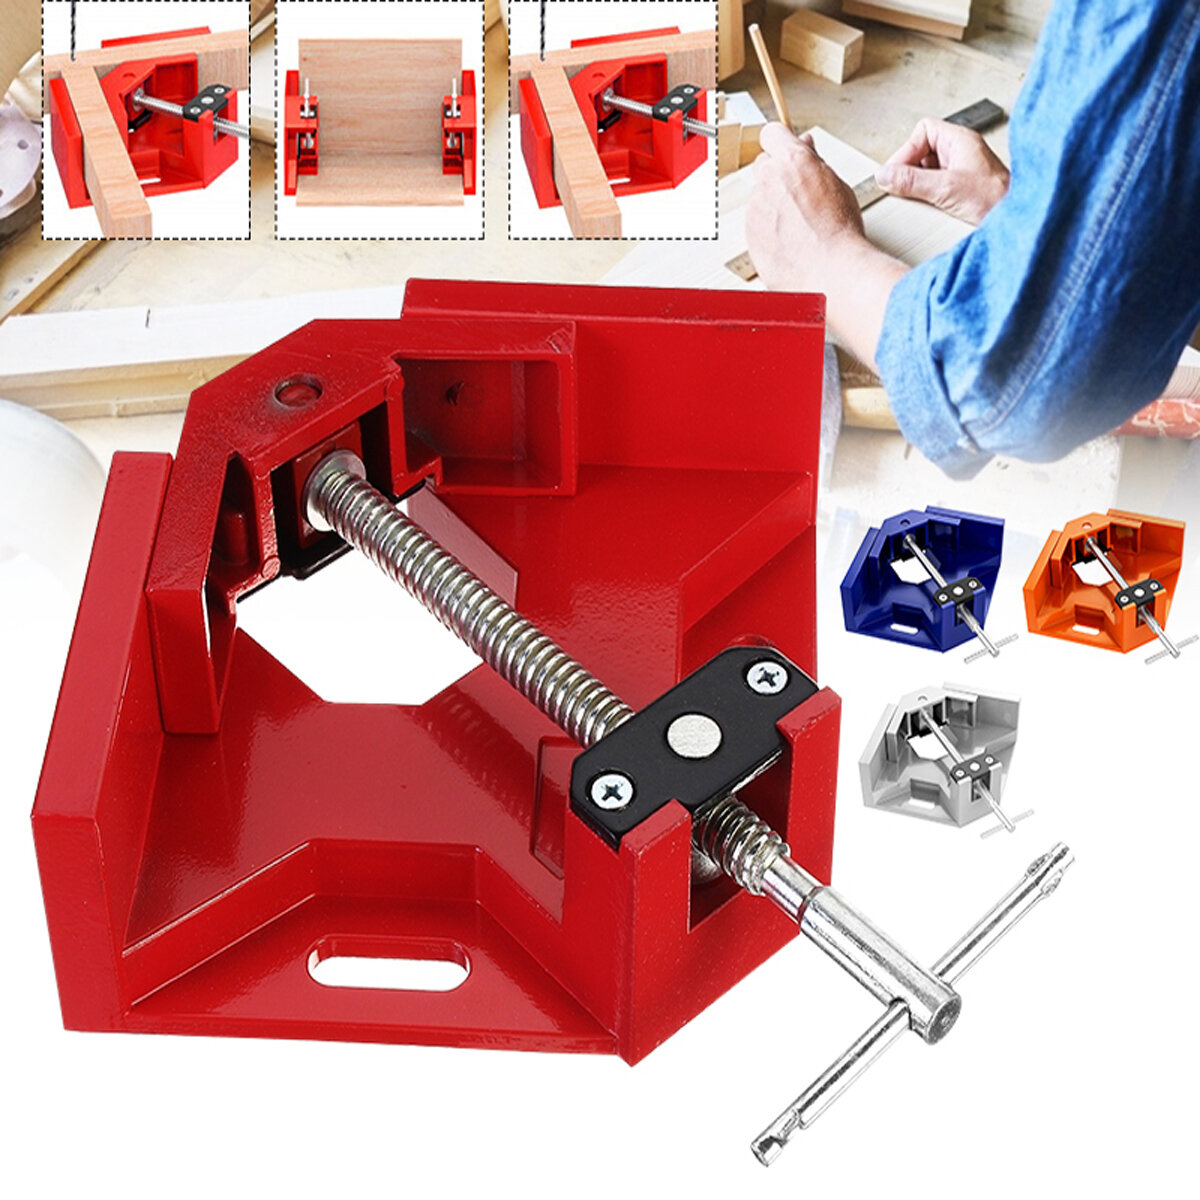 

Drillpro 90 Degree Corner Right Angle Clamp T Handle Vice Grip Woodworking Quick Fixture Aluminum Alloy Tool Clamps